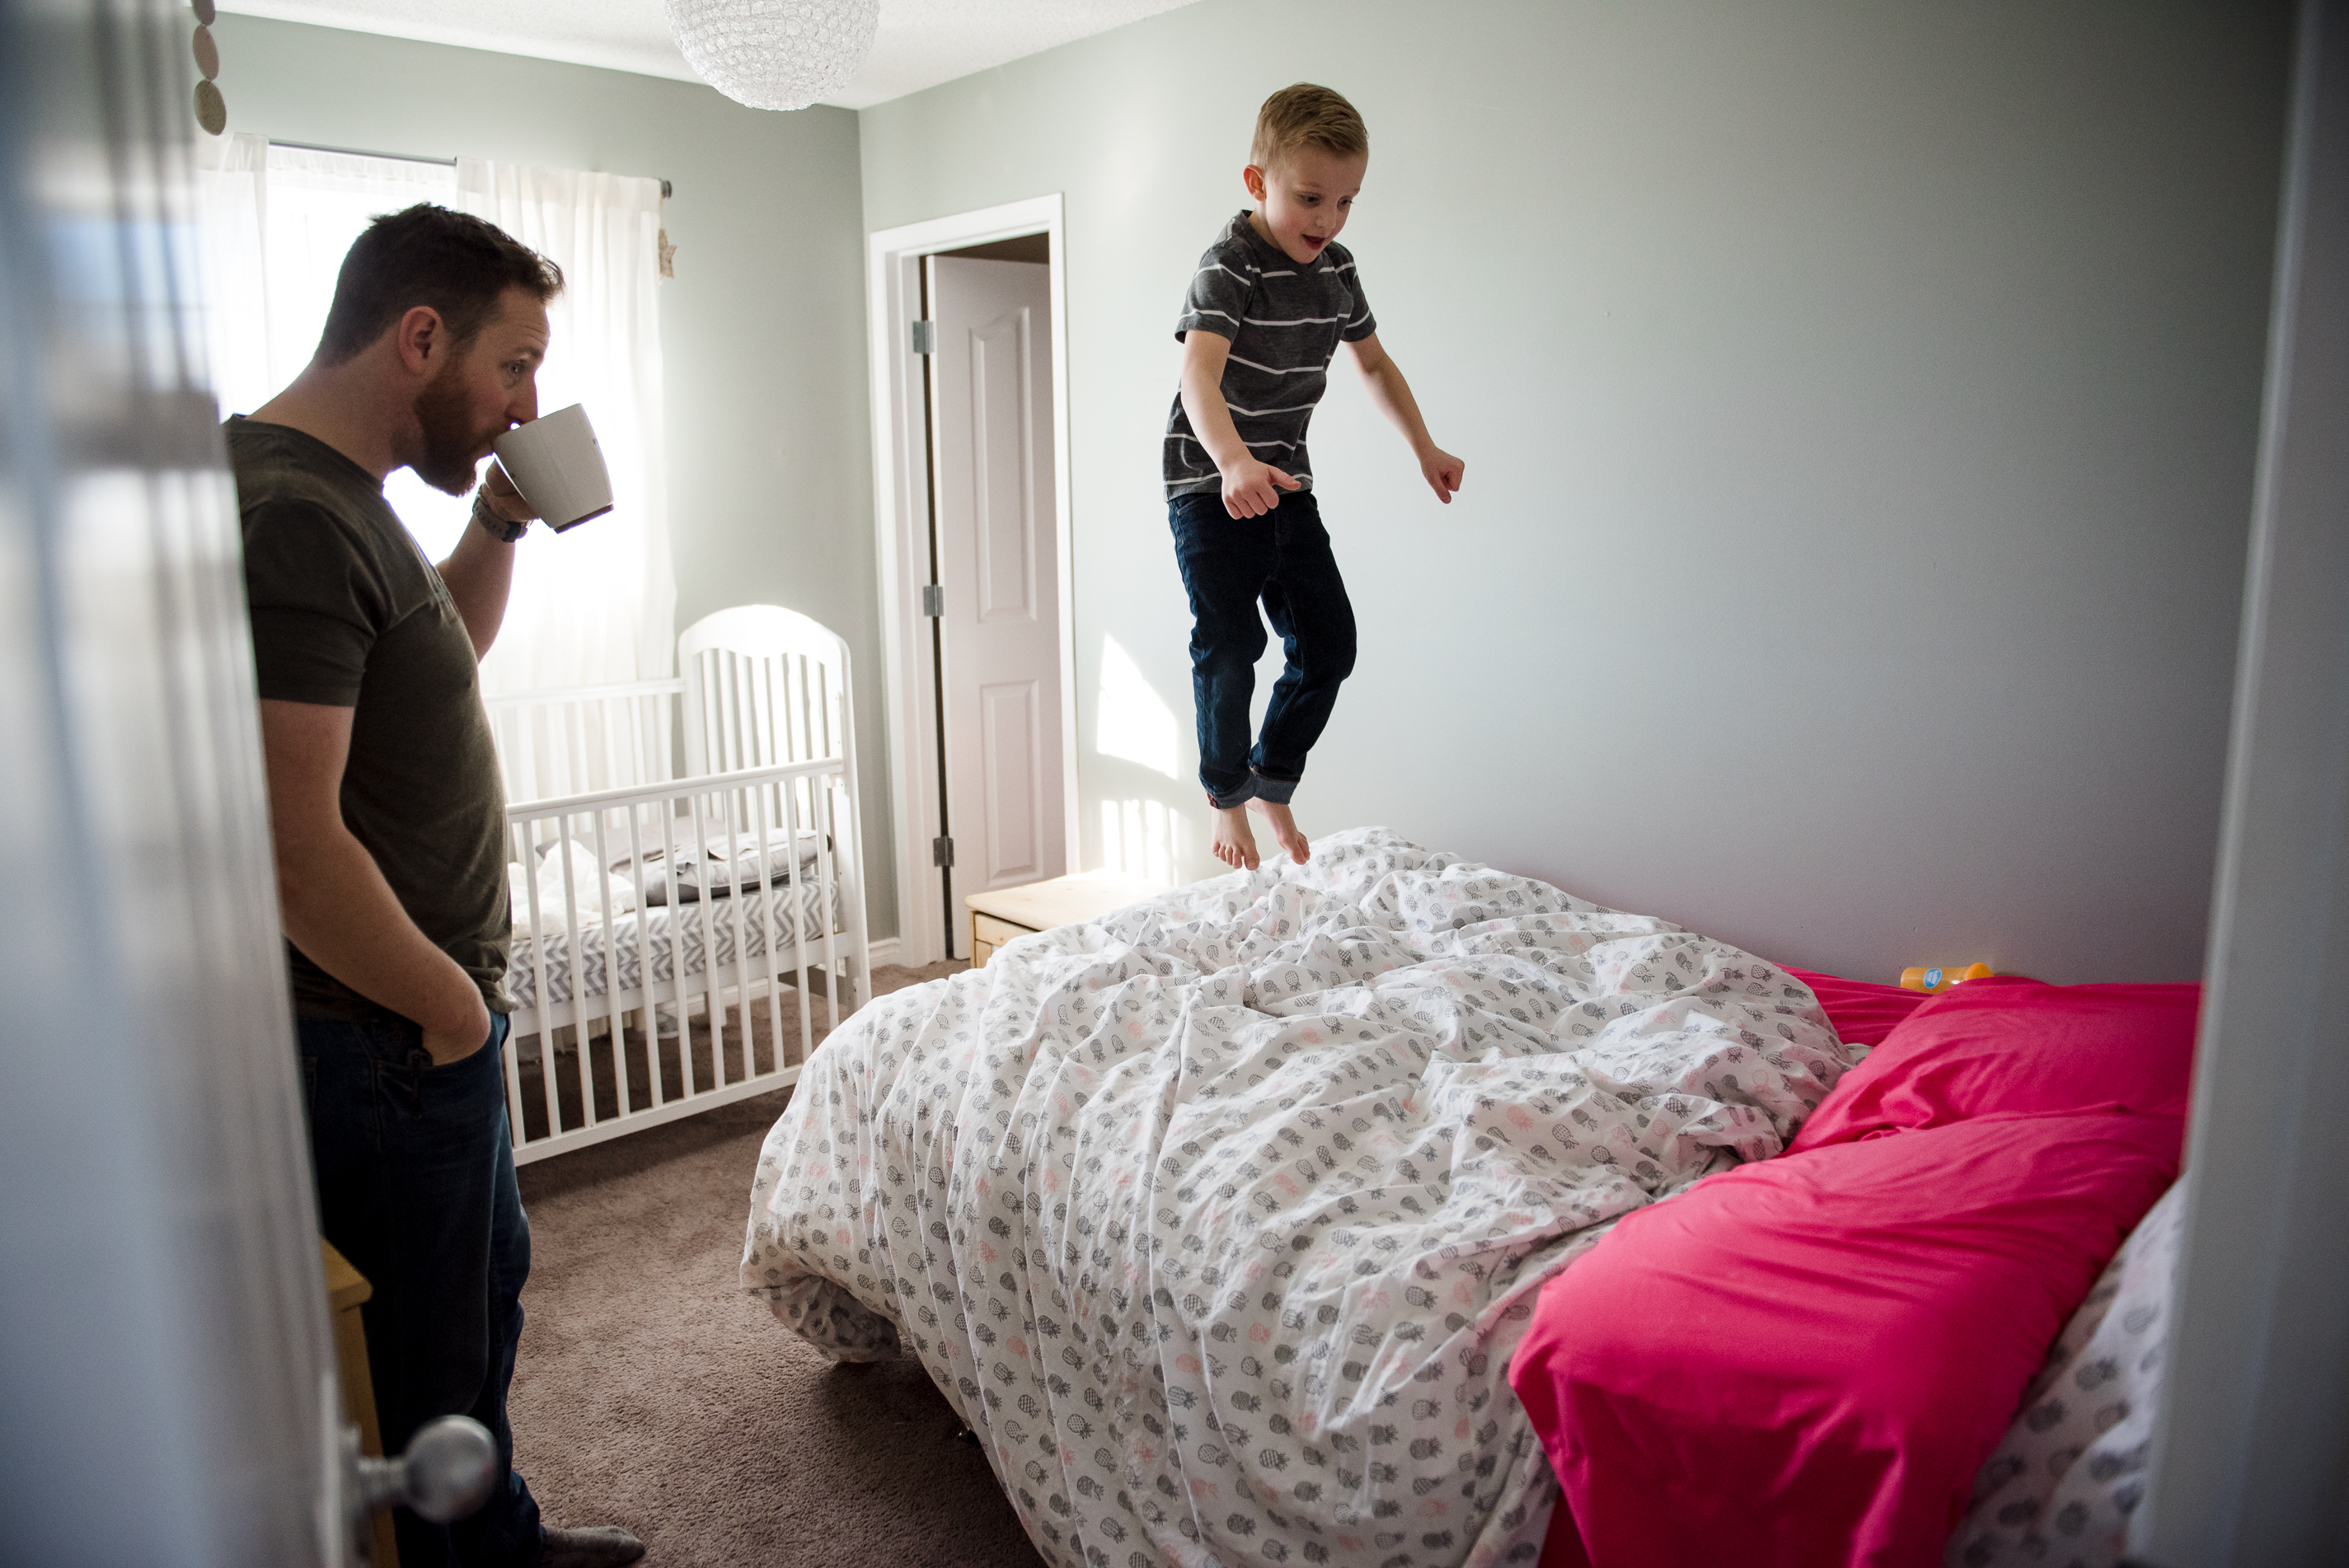 A dad drinks coffee while watching his son jump on the bed in his bedroom